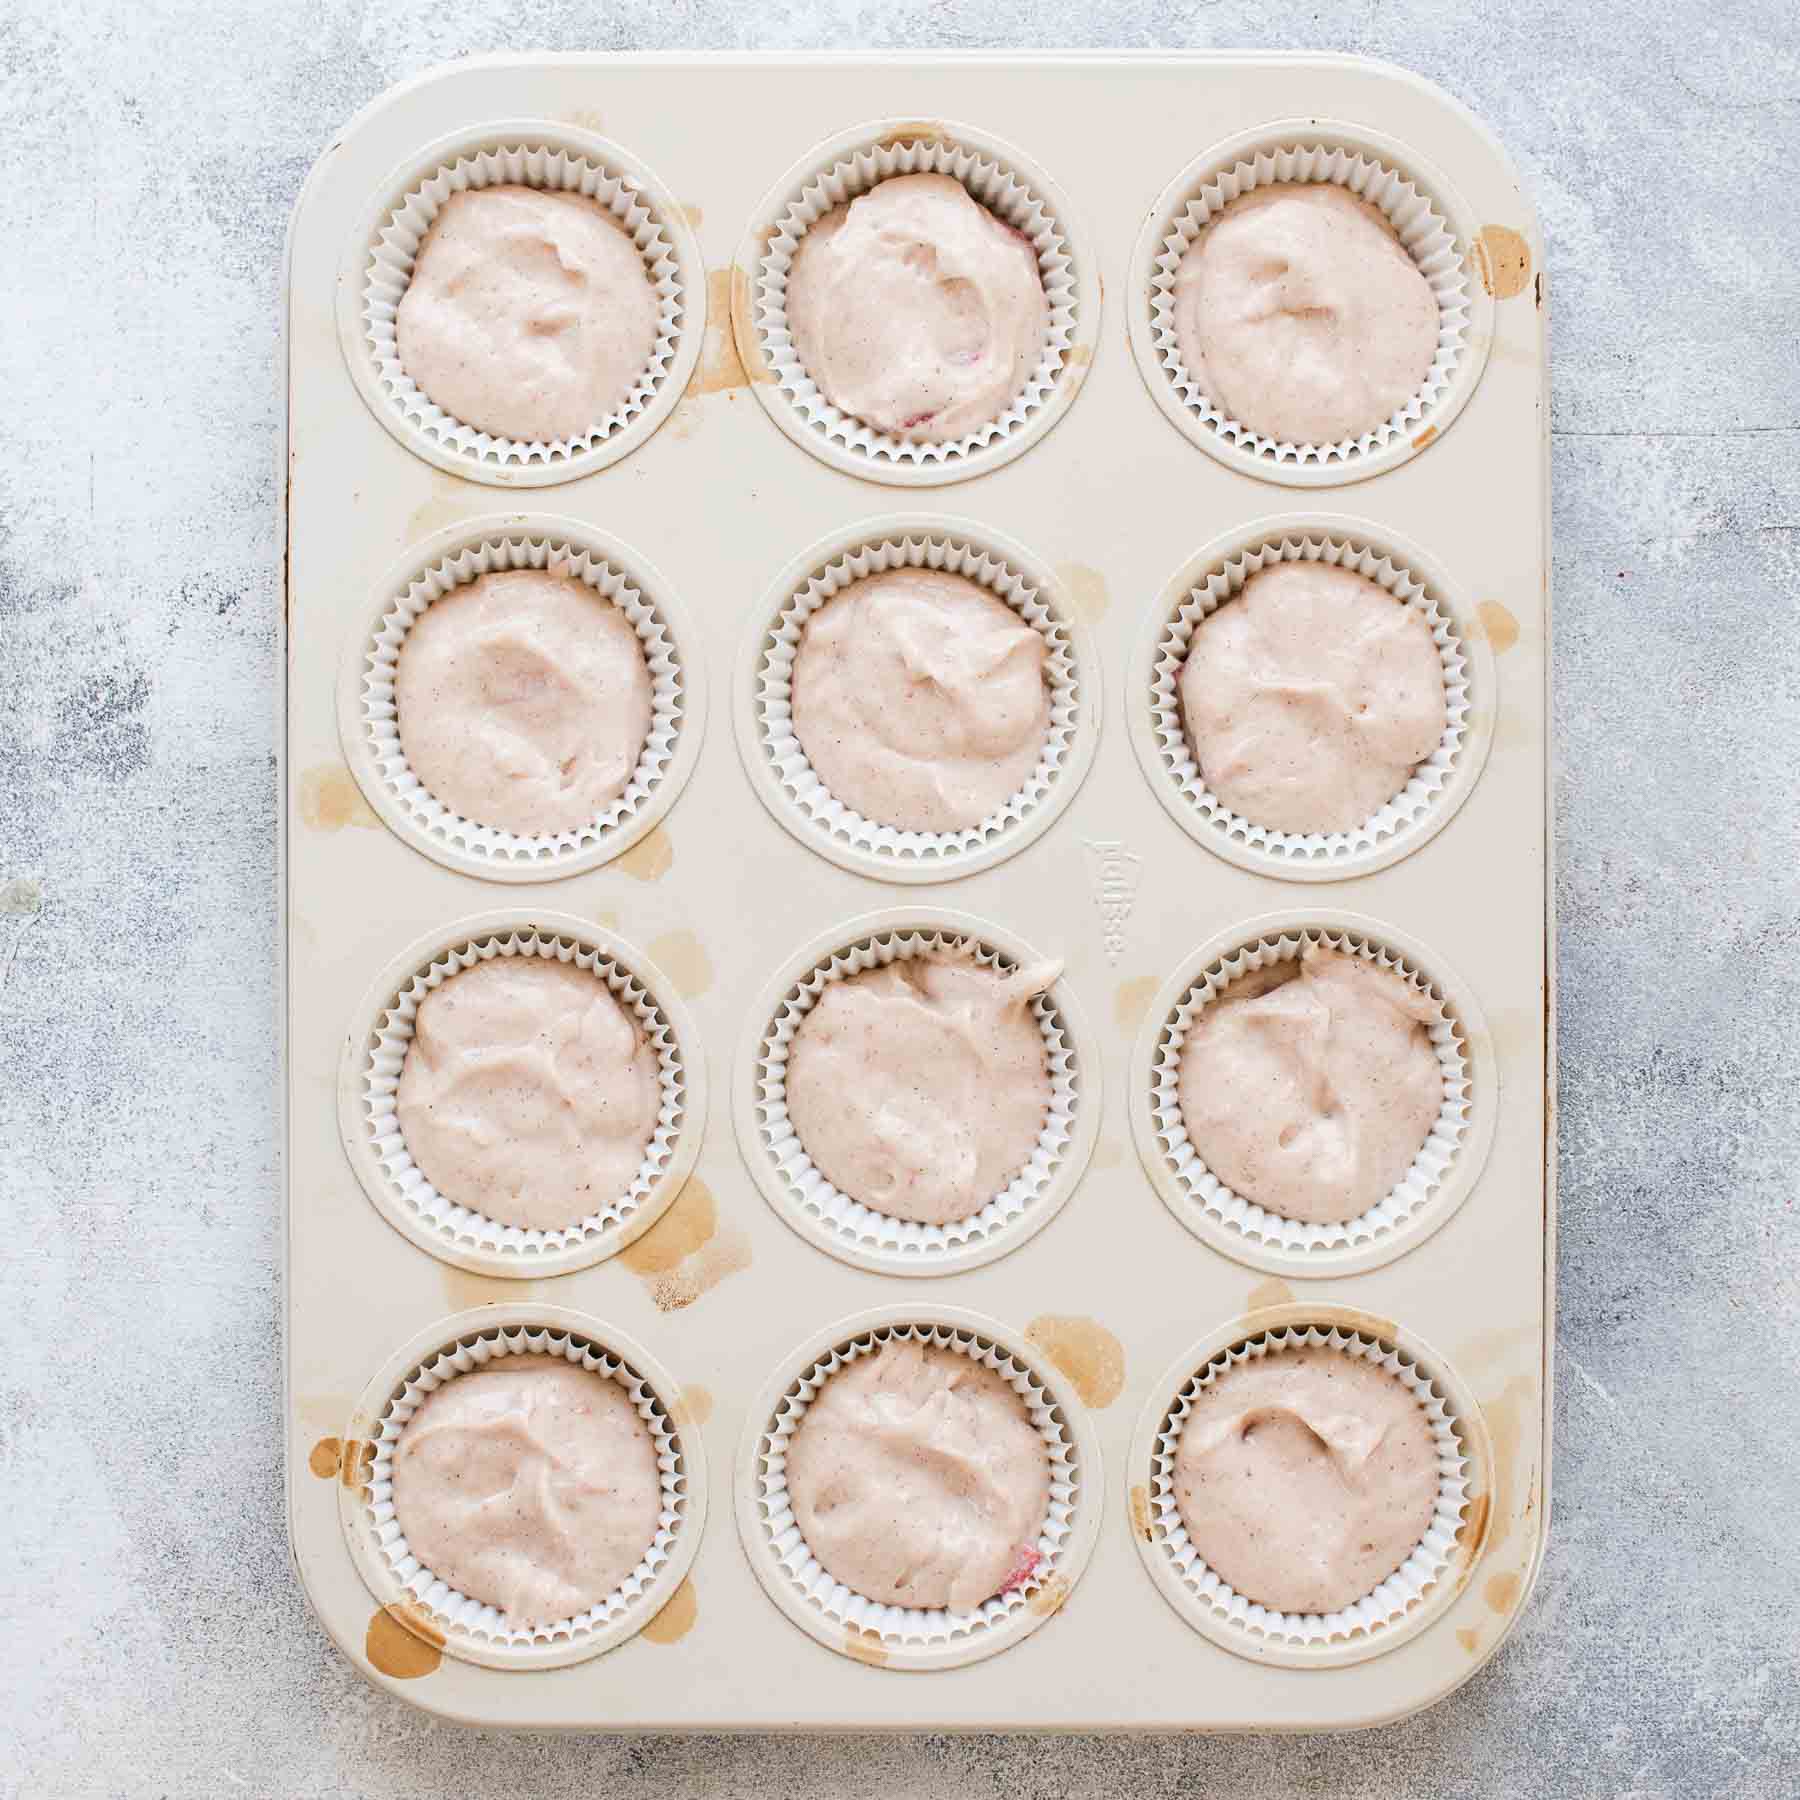 Strawberry cupcakes batter in muffin pan